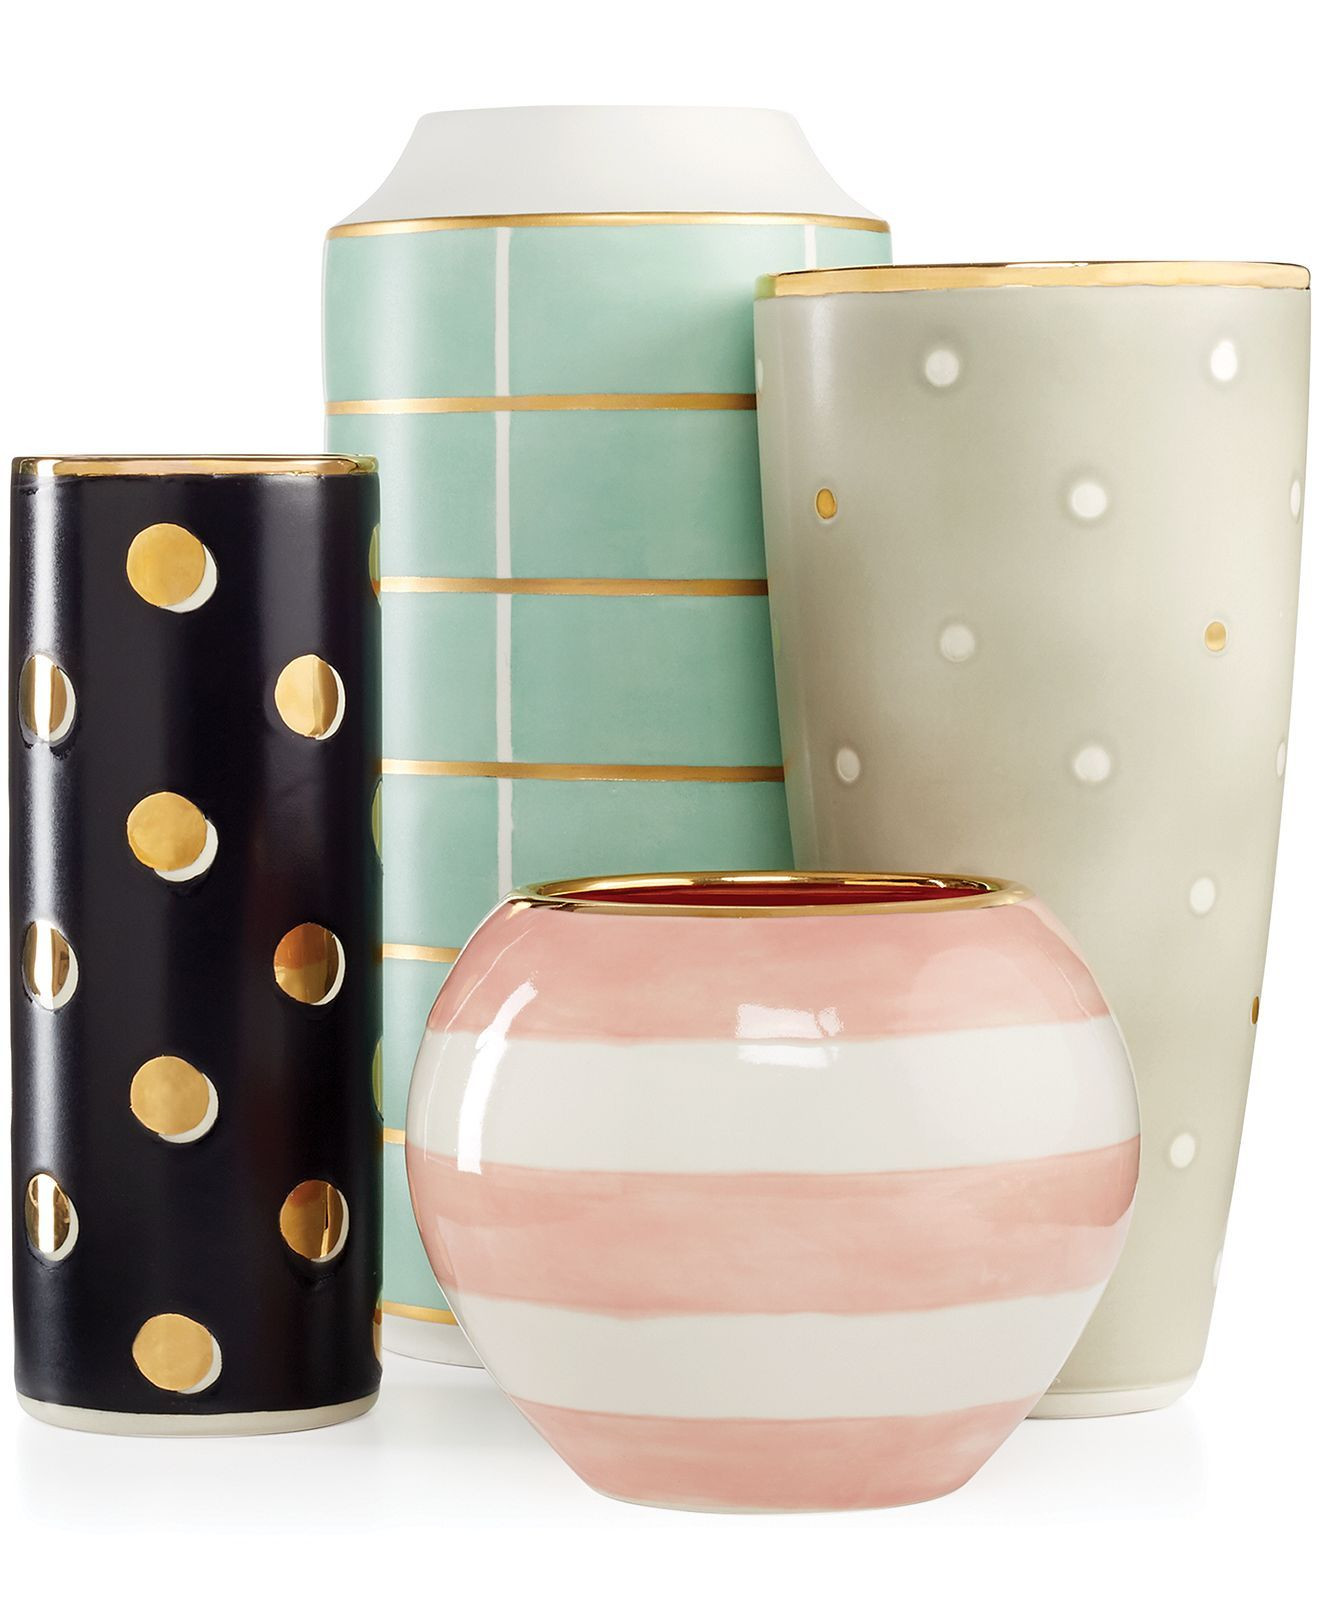 12 attractive Kate Spade New York Pearl Place Vase 2024 free download kate spade new york pearl place vase of kate spade new york sunset street vase collection macys pink within kate spade new york sunset street vase collection macys pink white one for the des